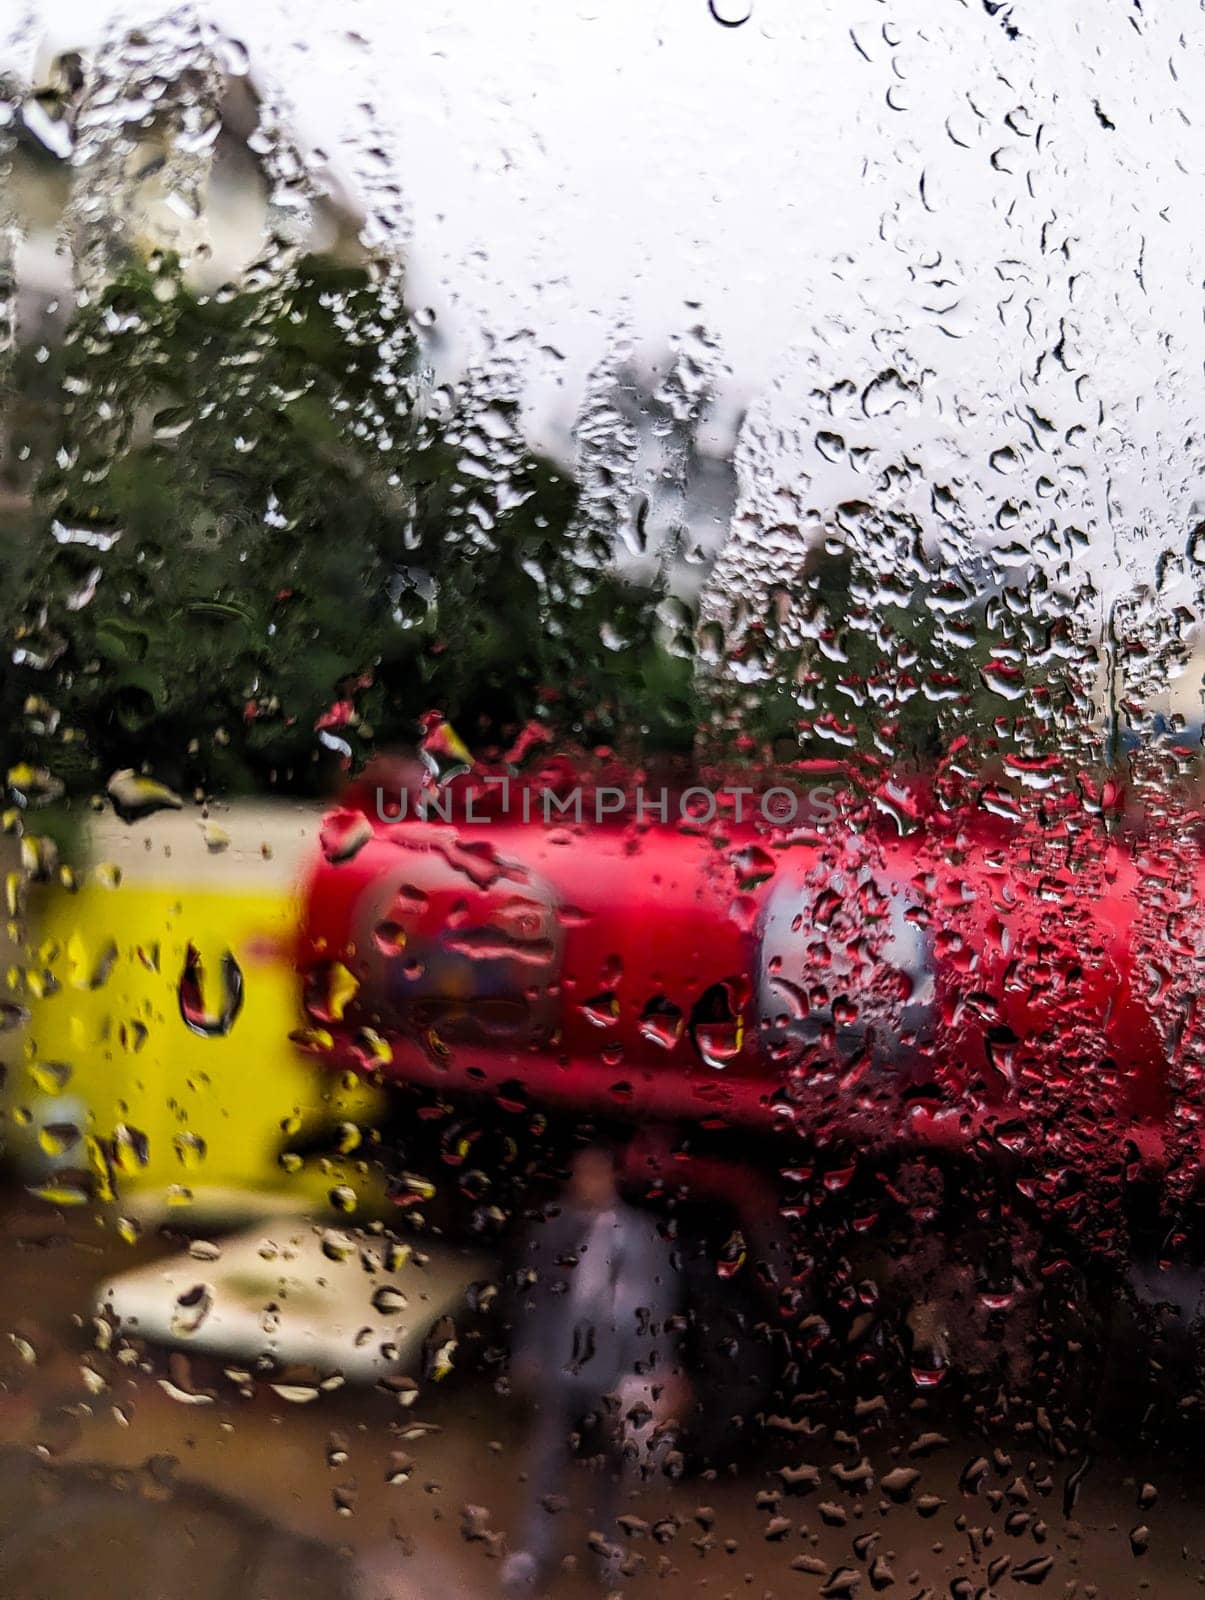 A blurry image of a red and yellow truck, likely a delivery vehicle, is seen through a window covered in rain droplets. The truck is parked in a city setting. The image captures the essence of a rainy day, with the raindrops blurring the background and creating a sense of movement. The image is taken from a perspective inside a vehicle or building.